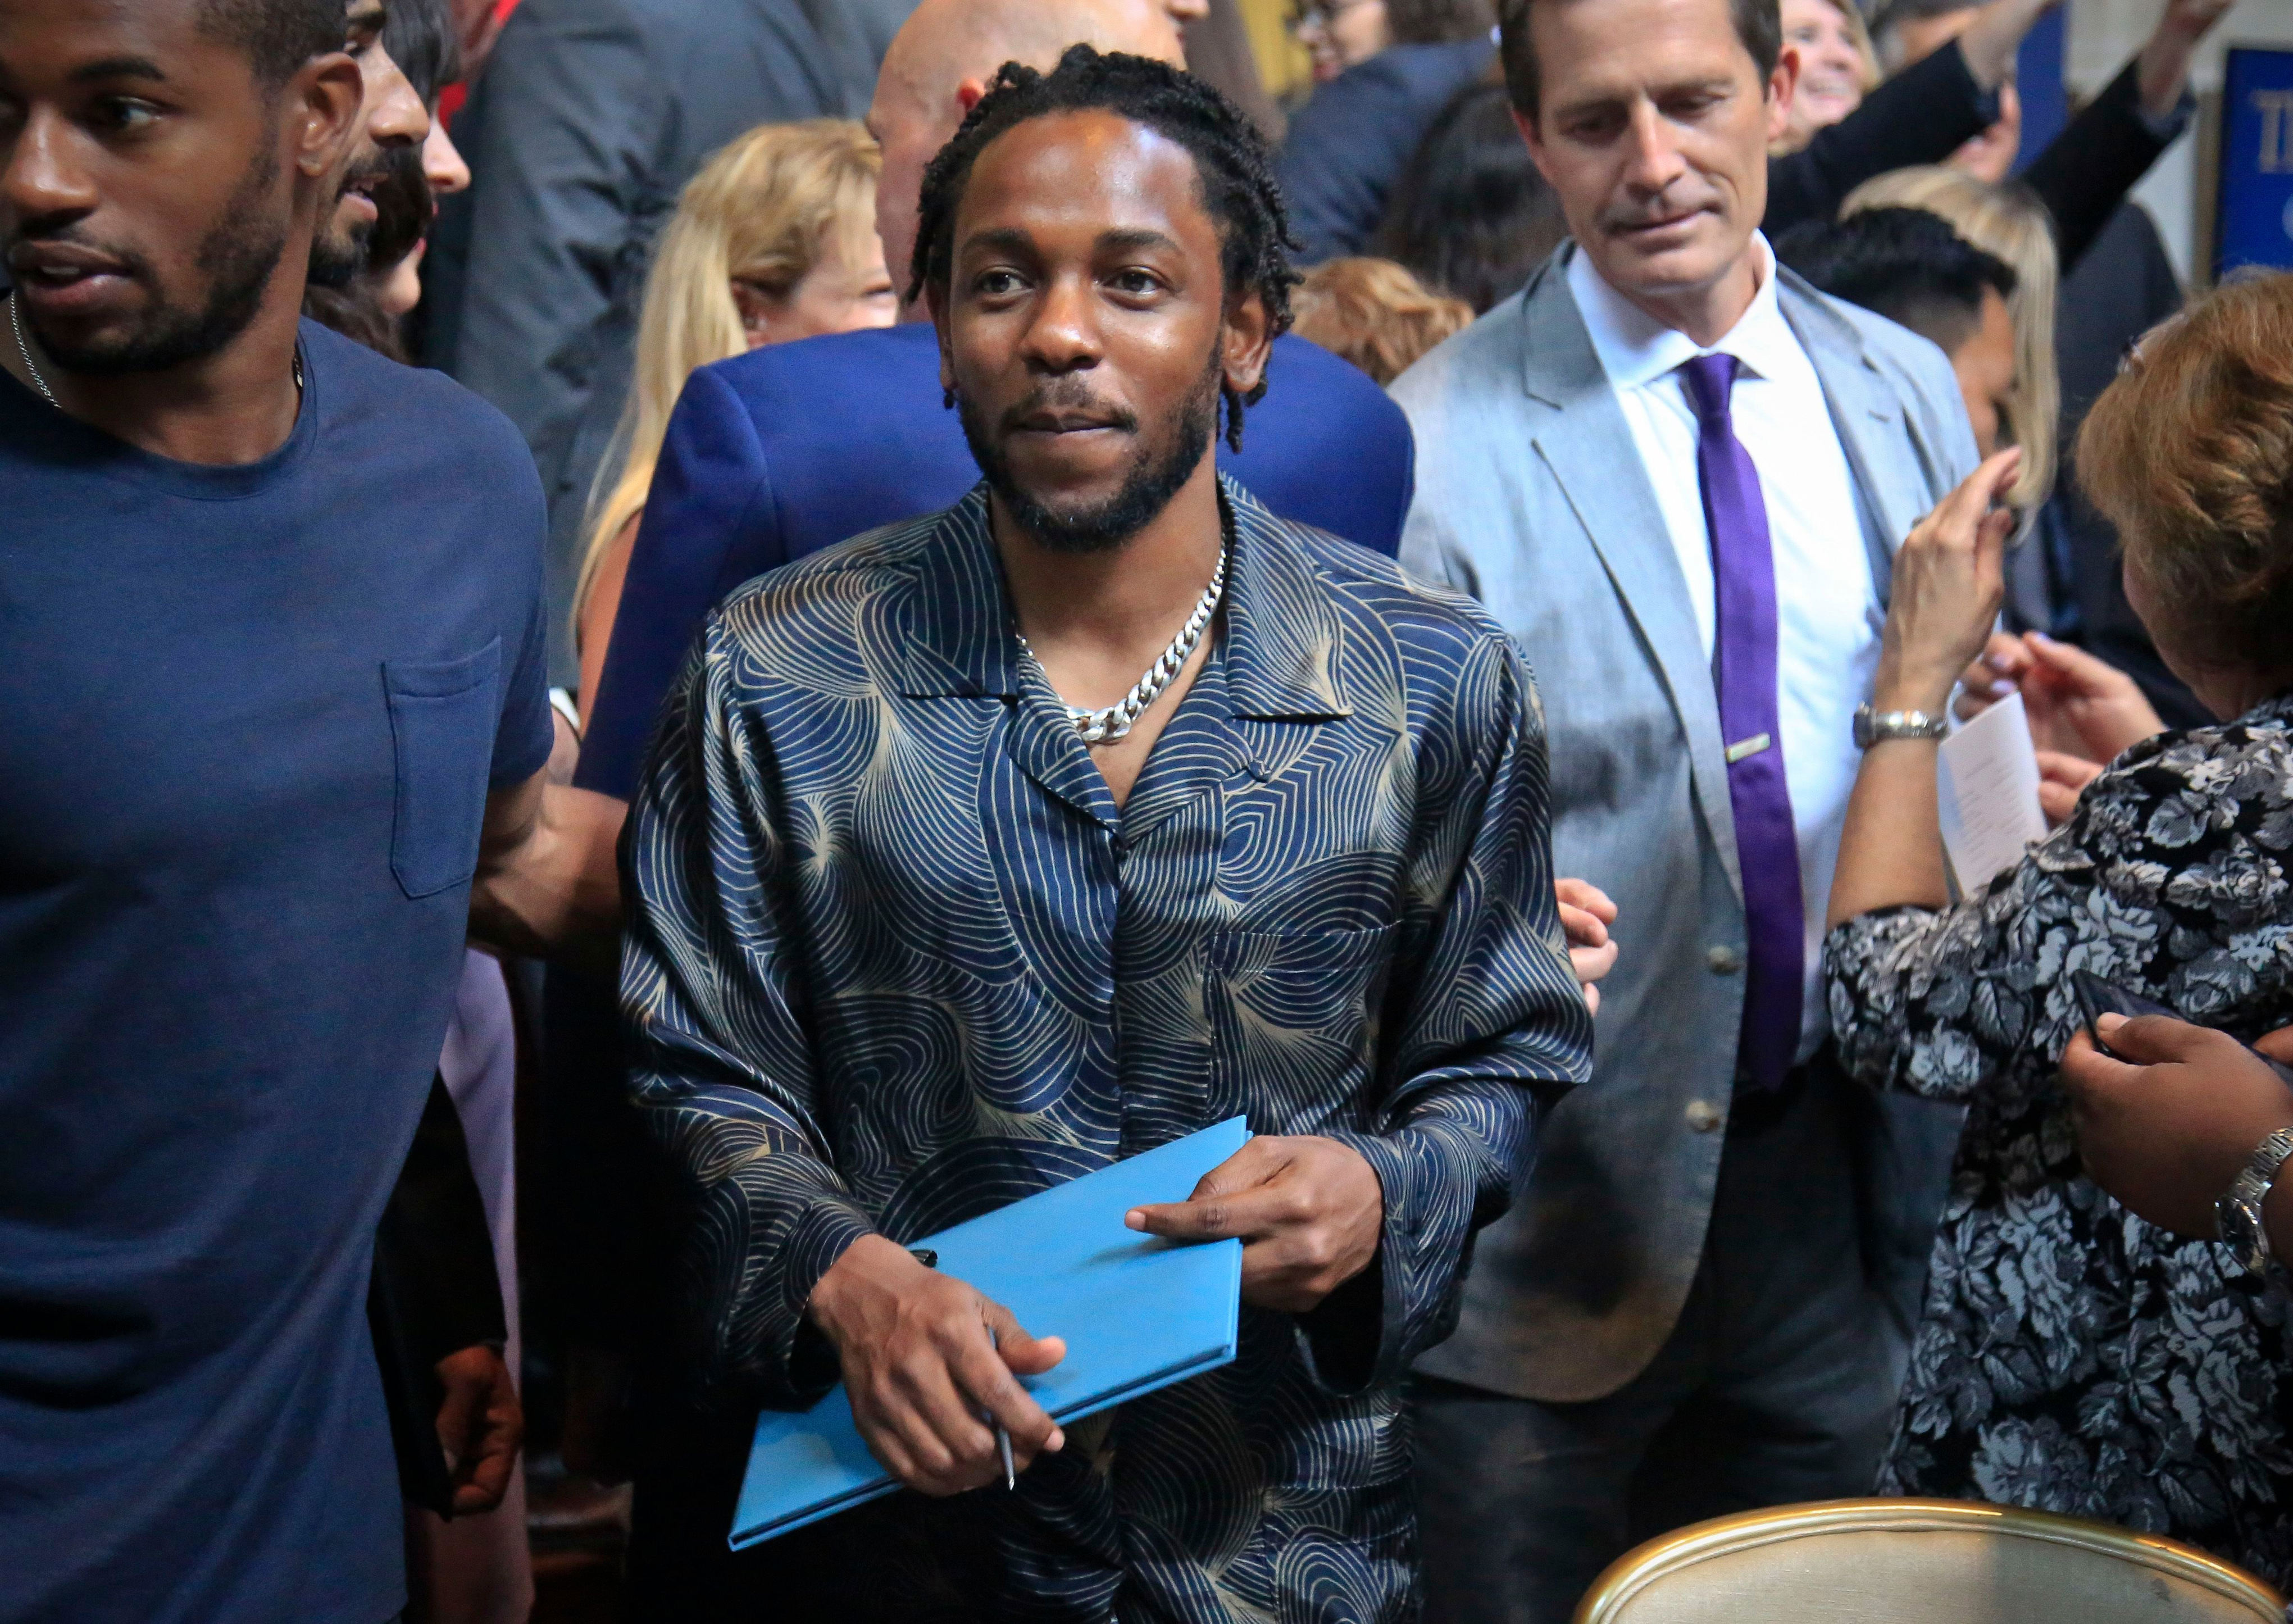 <p>In 2018, music star Kendrick Lamar became the first rapper to win the Pulitzer Prize for music. He did it with his 2017 album "DAMN.," becoming the first music winner in the 100-year history of the Pulitzers who did not come from the classical or jazz worlds. The prize board praised his album as "a virtuosic song collection unified by its vernacular authenticity and rhythmic dynamism that offers affecting vignettes capturing the complexity of modern African American life."</p>